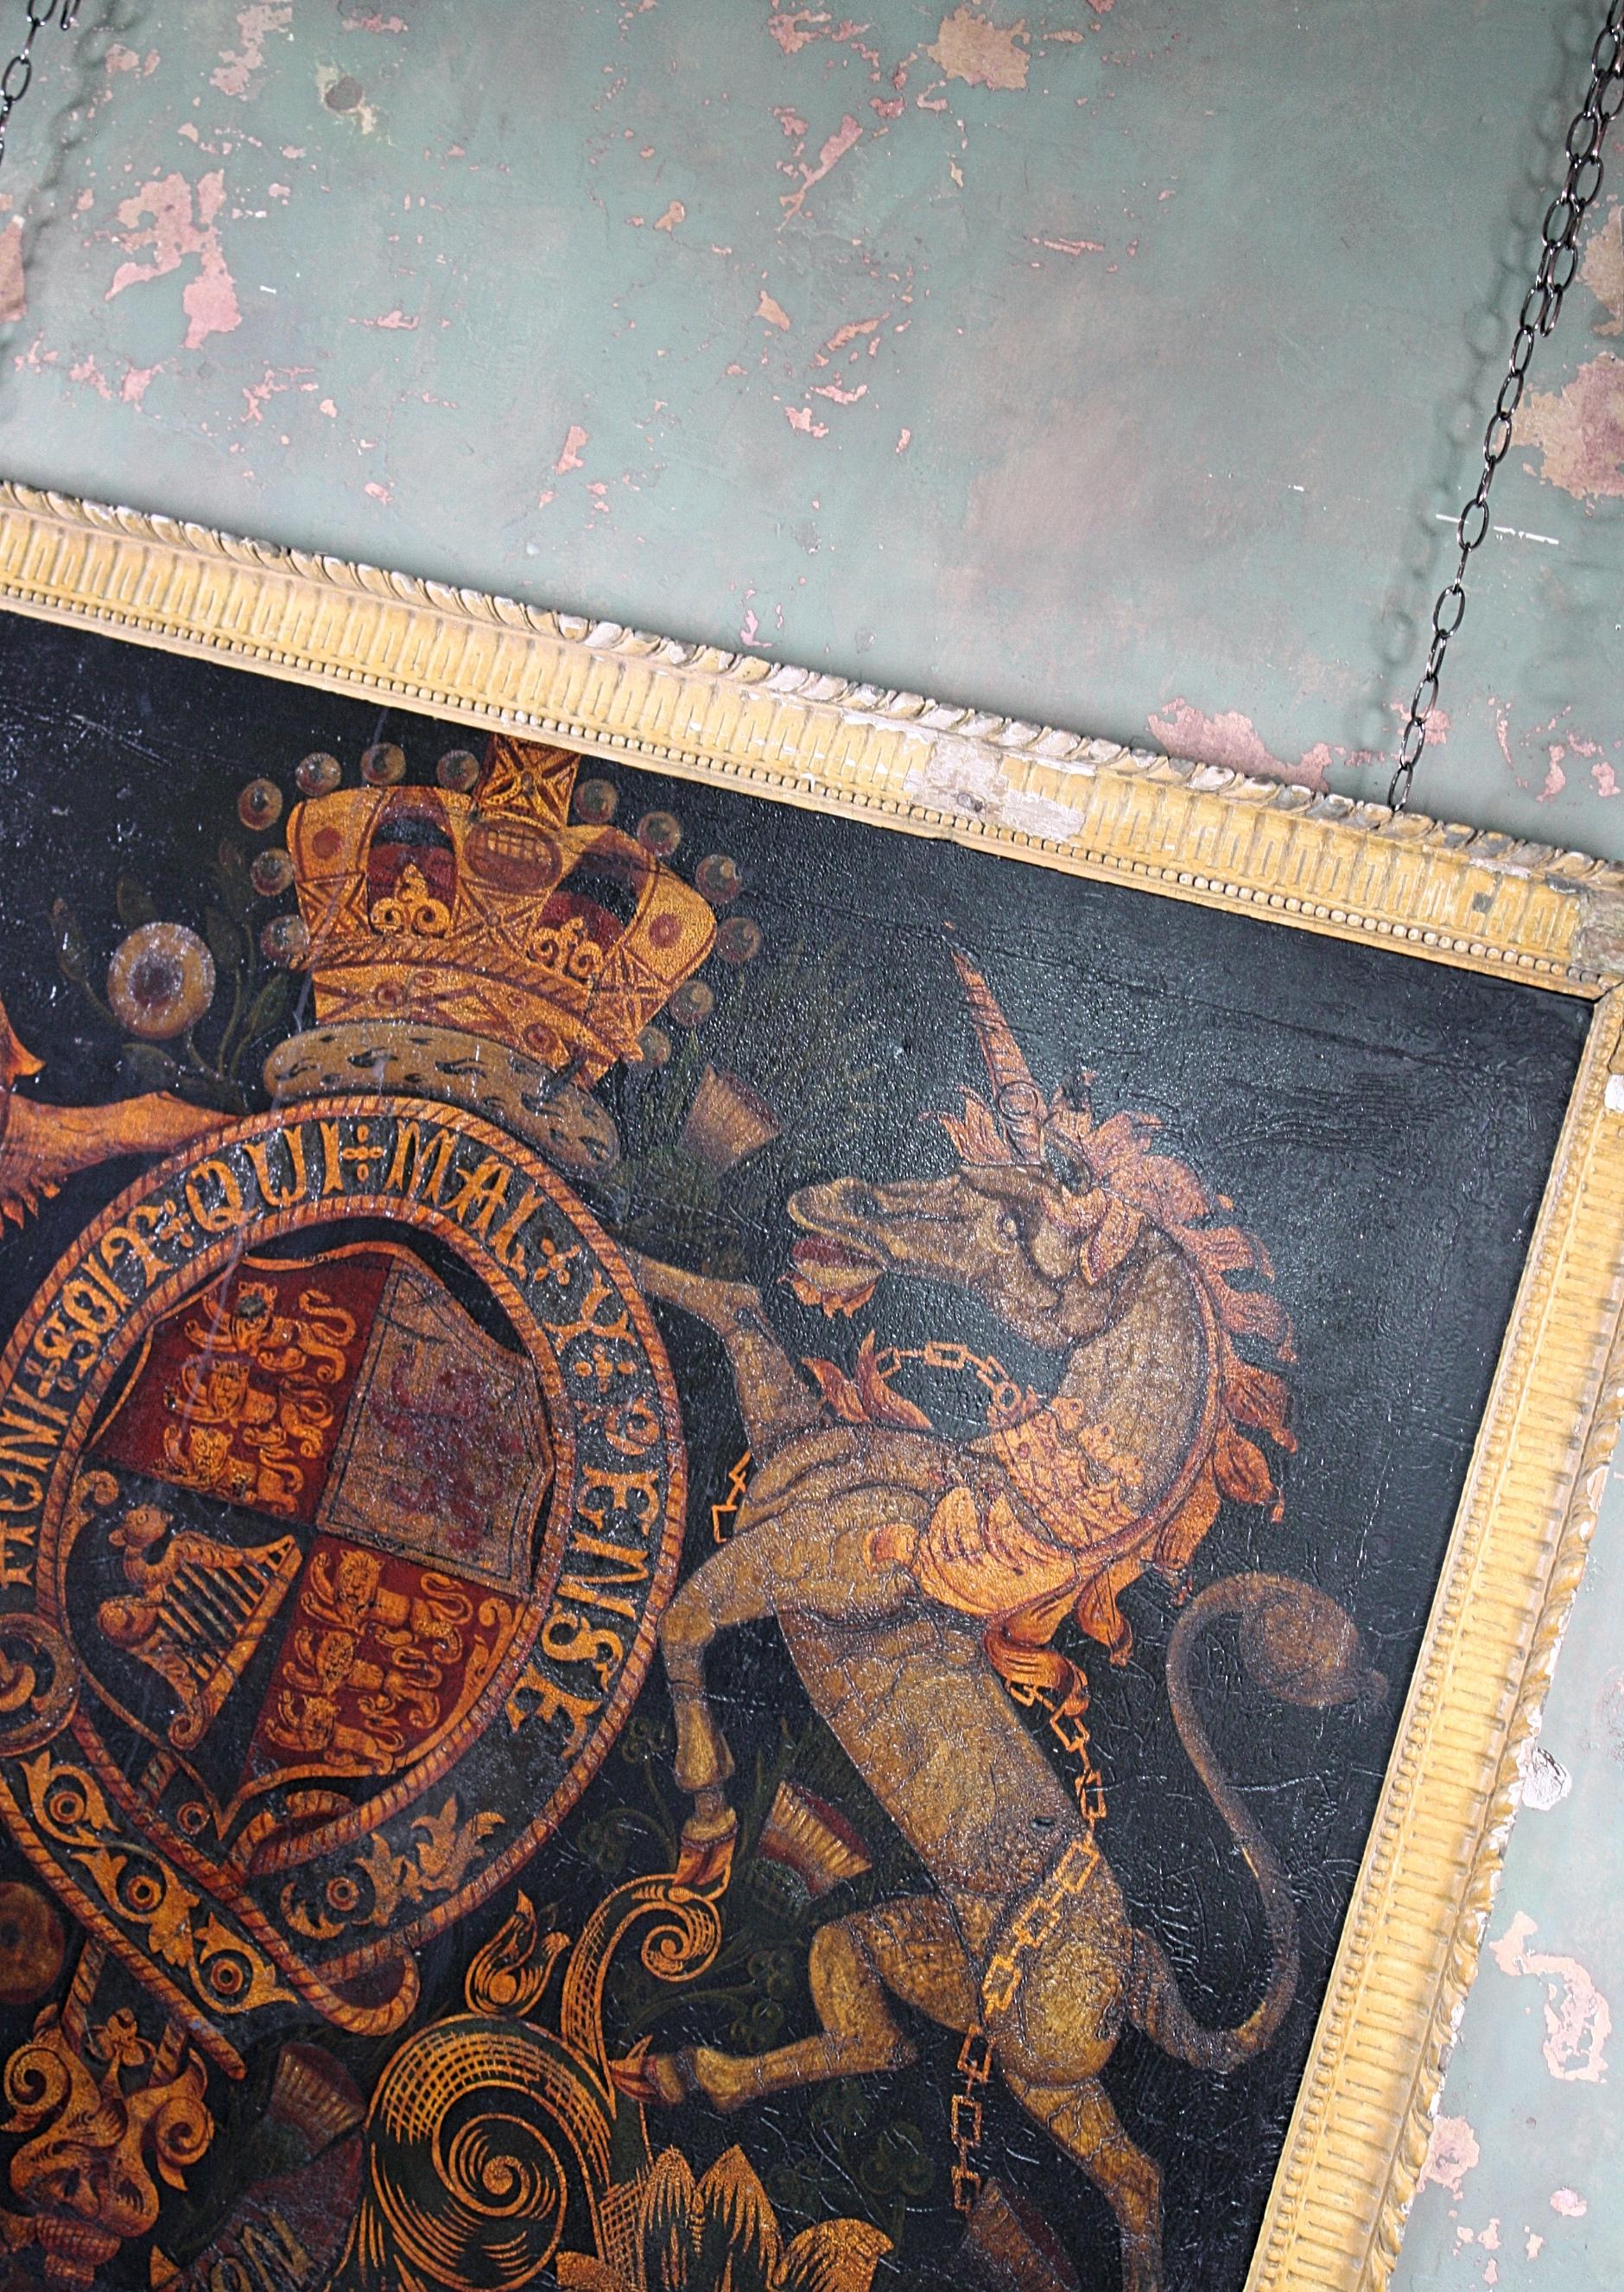 Canvas Early Victorian 19th Century Painted Royal Coat of Arms Armorial